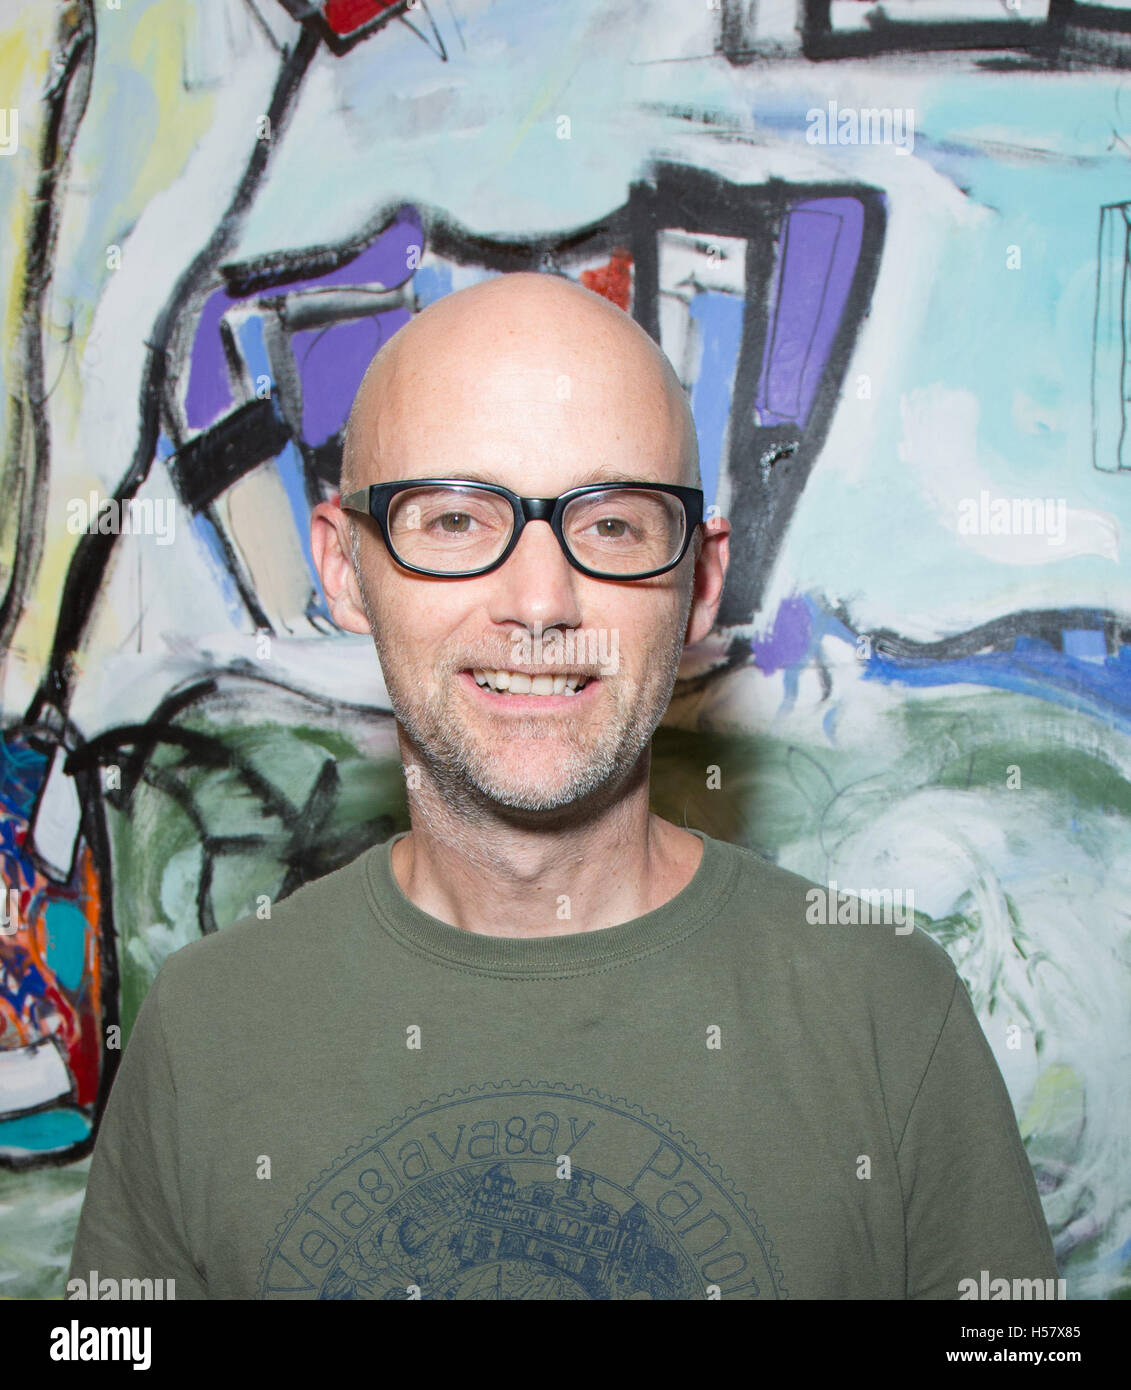 Musician, songwriter Moby attends a solo exhibition “Immovable Thoughts” by Alexander Yulish hosted by “Interview” magazine at Ace Gallery Beverly Hills on October 8, 2015 in Beverly Hills, California, USA Stock Photo